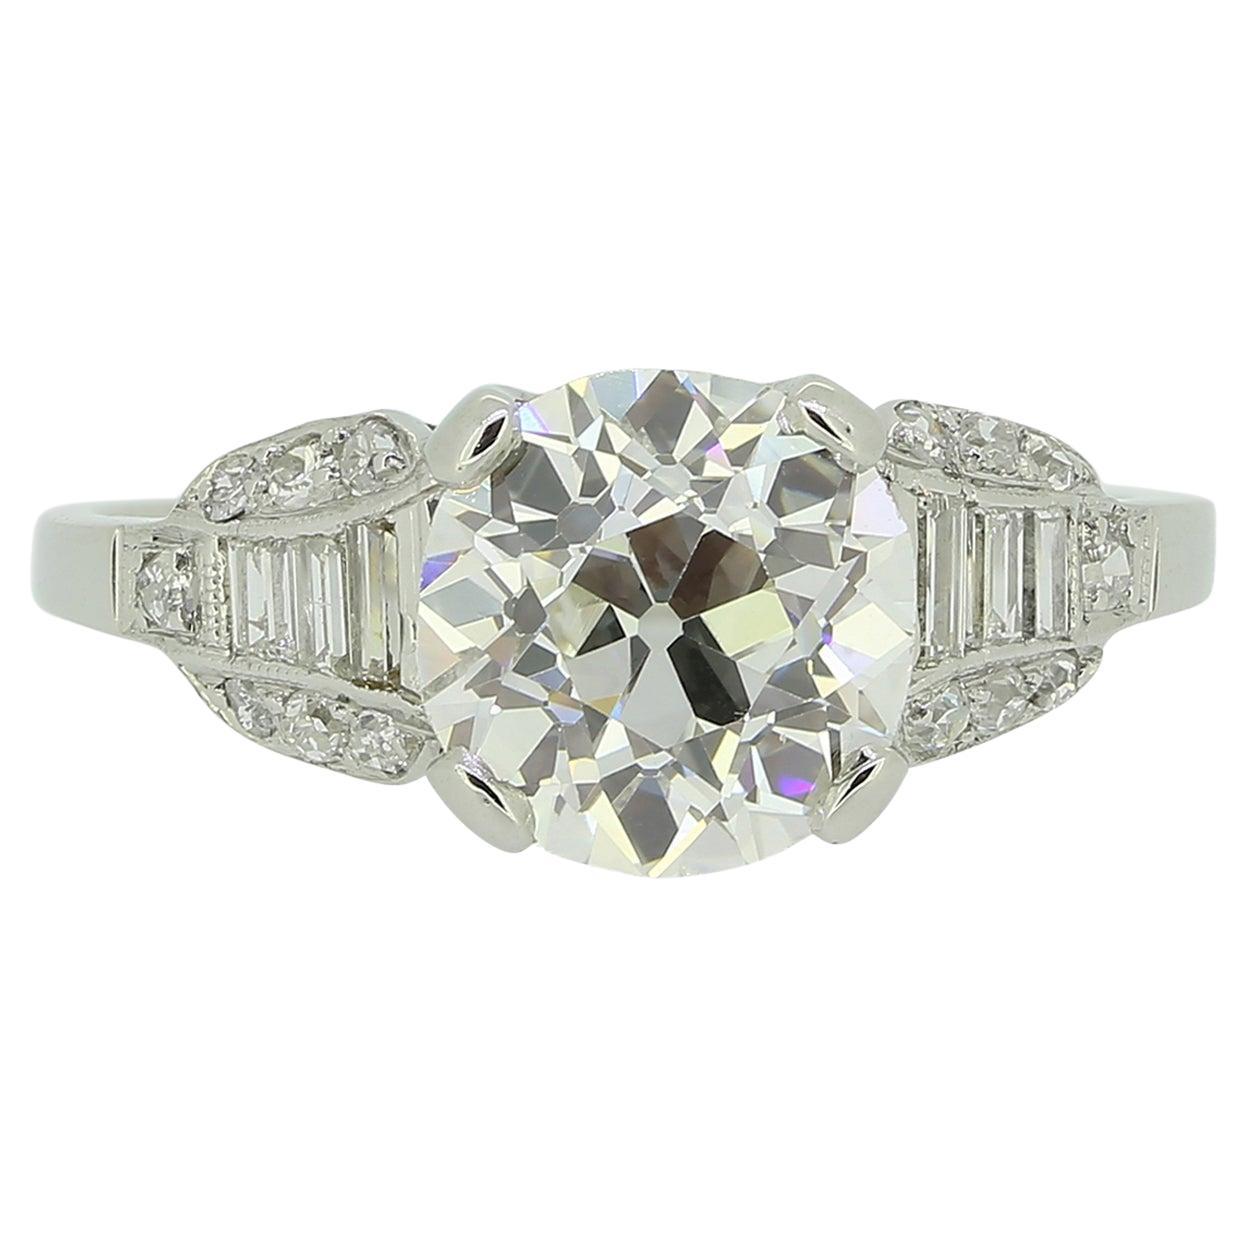 Cartier 2.00 Carat Old Cushion Cut Diamond Engagement Ring For Sale